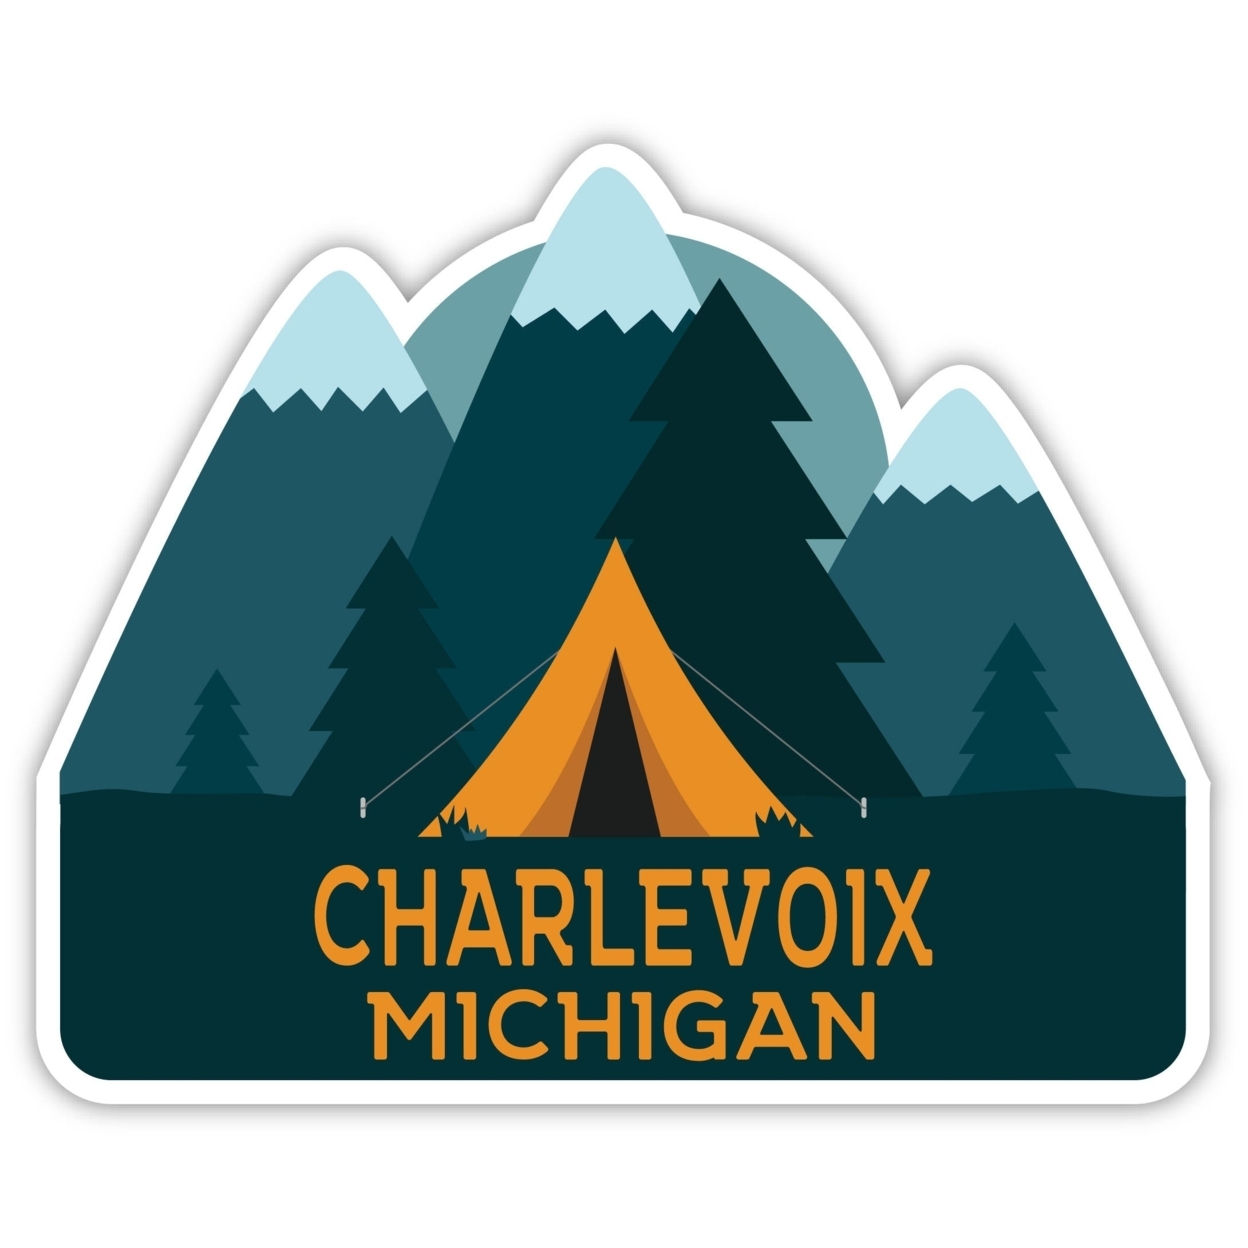 Charlevoix Michigan Souvenir Decorative Stickers (Choose Theme And Size) - 4-Pack, 2-Inch, Tent